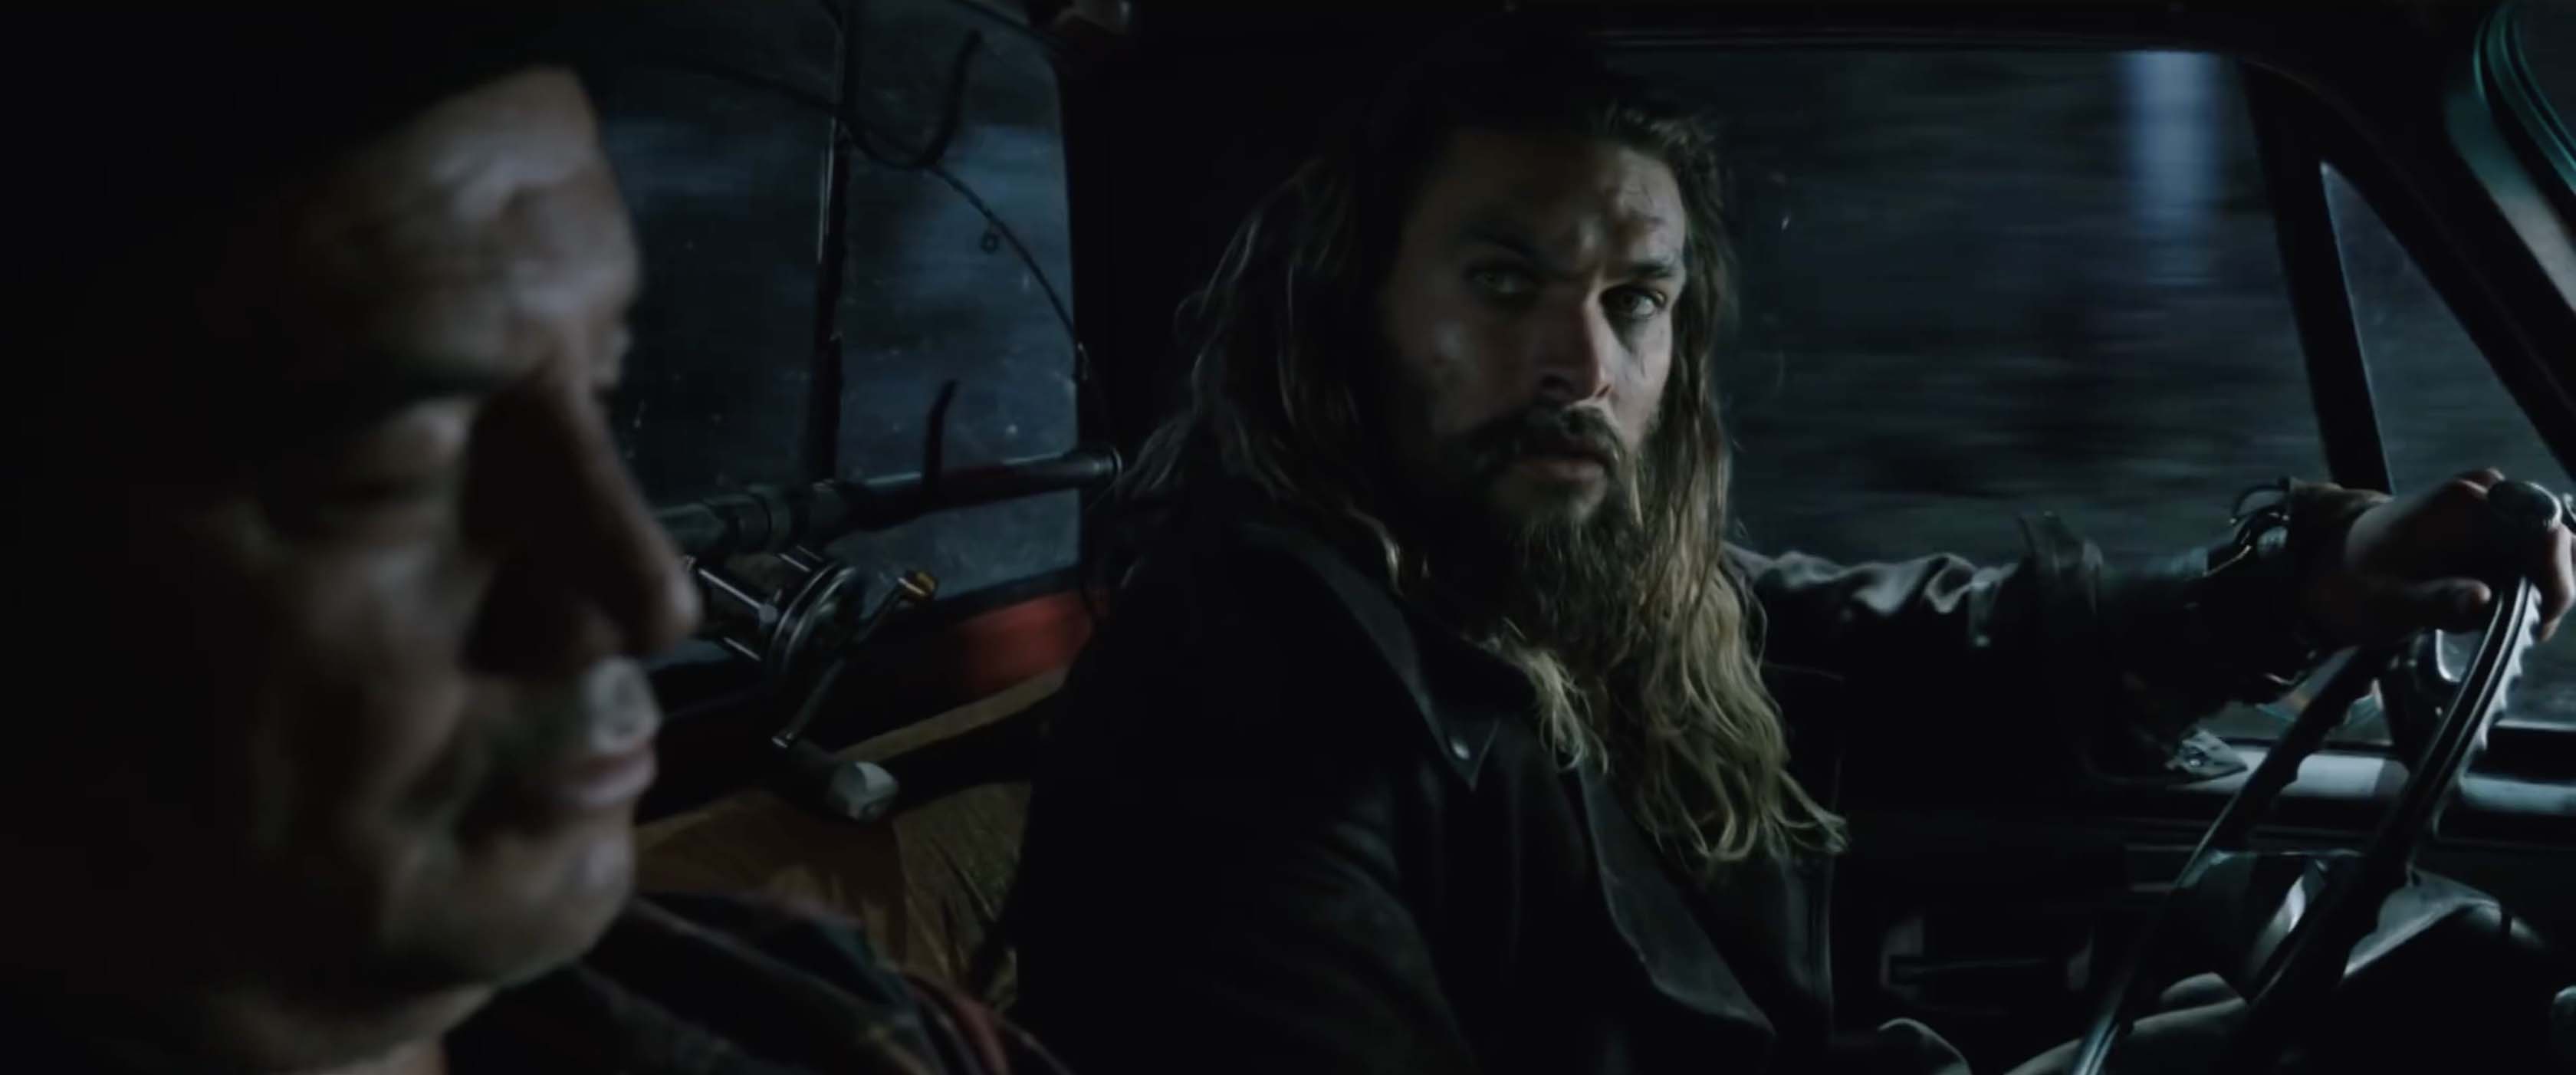 Aquaman Trailer - Our First Look at the King of the Seven Seas | The Nerdy